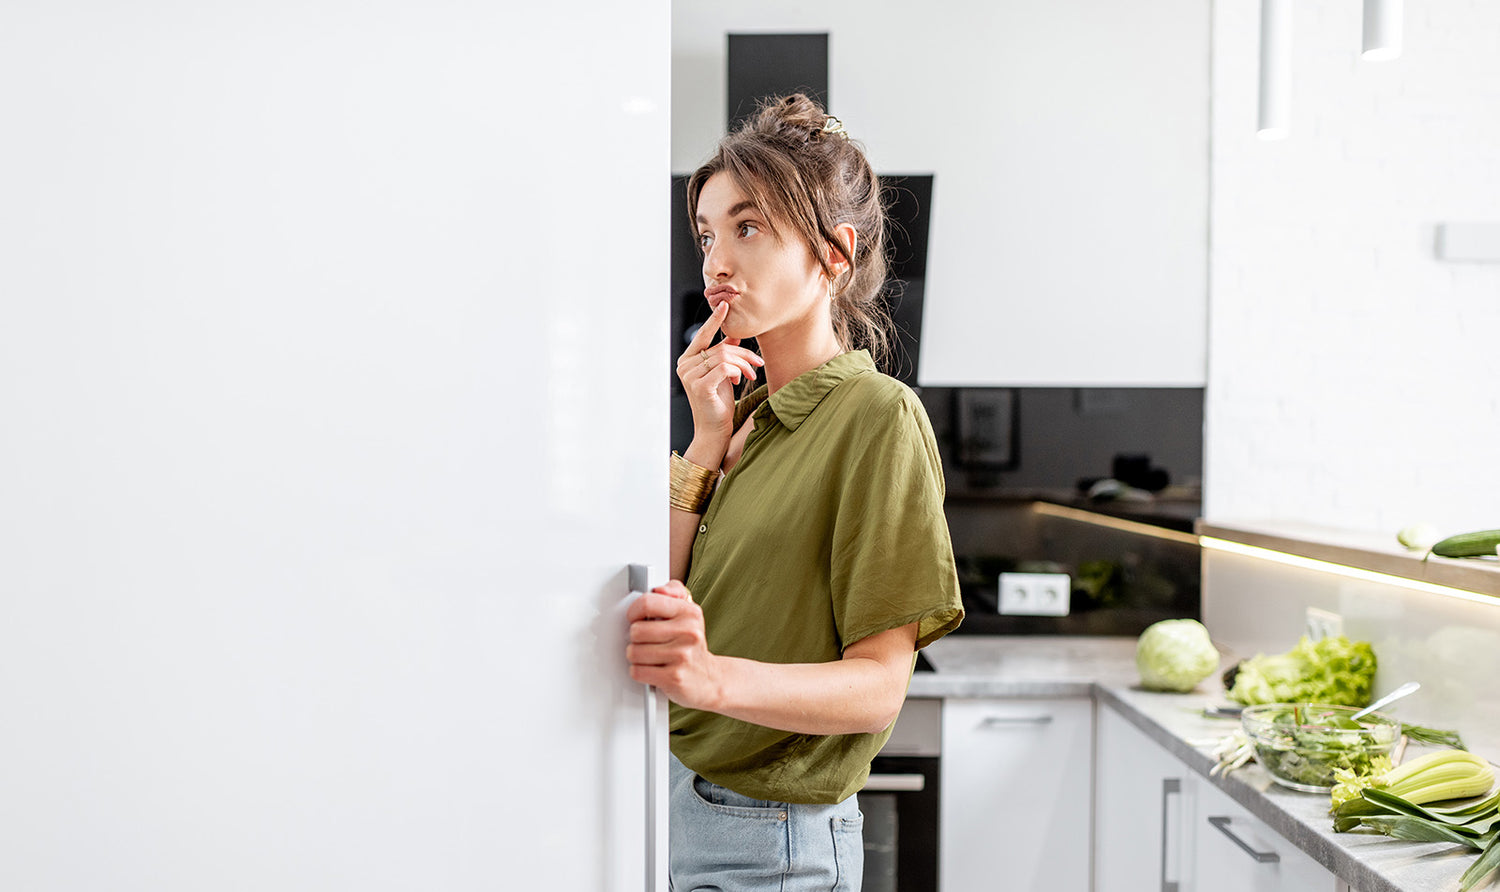 Photo of woman standing in all white kitchen looking skeptically into an open refrigerator